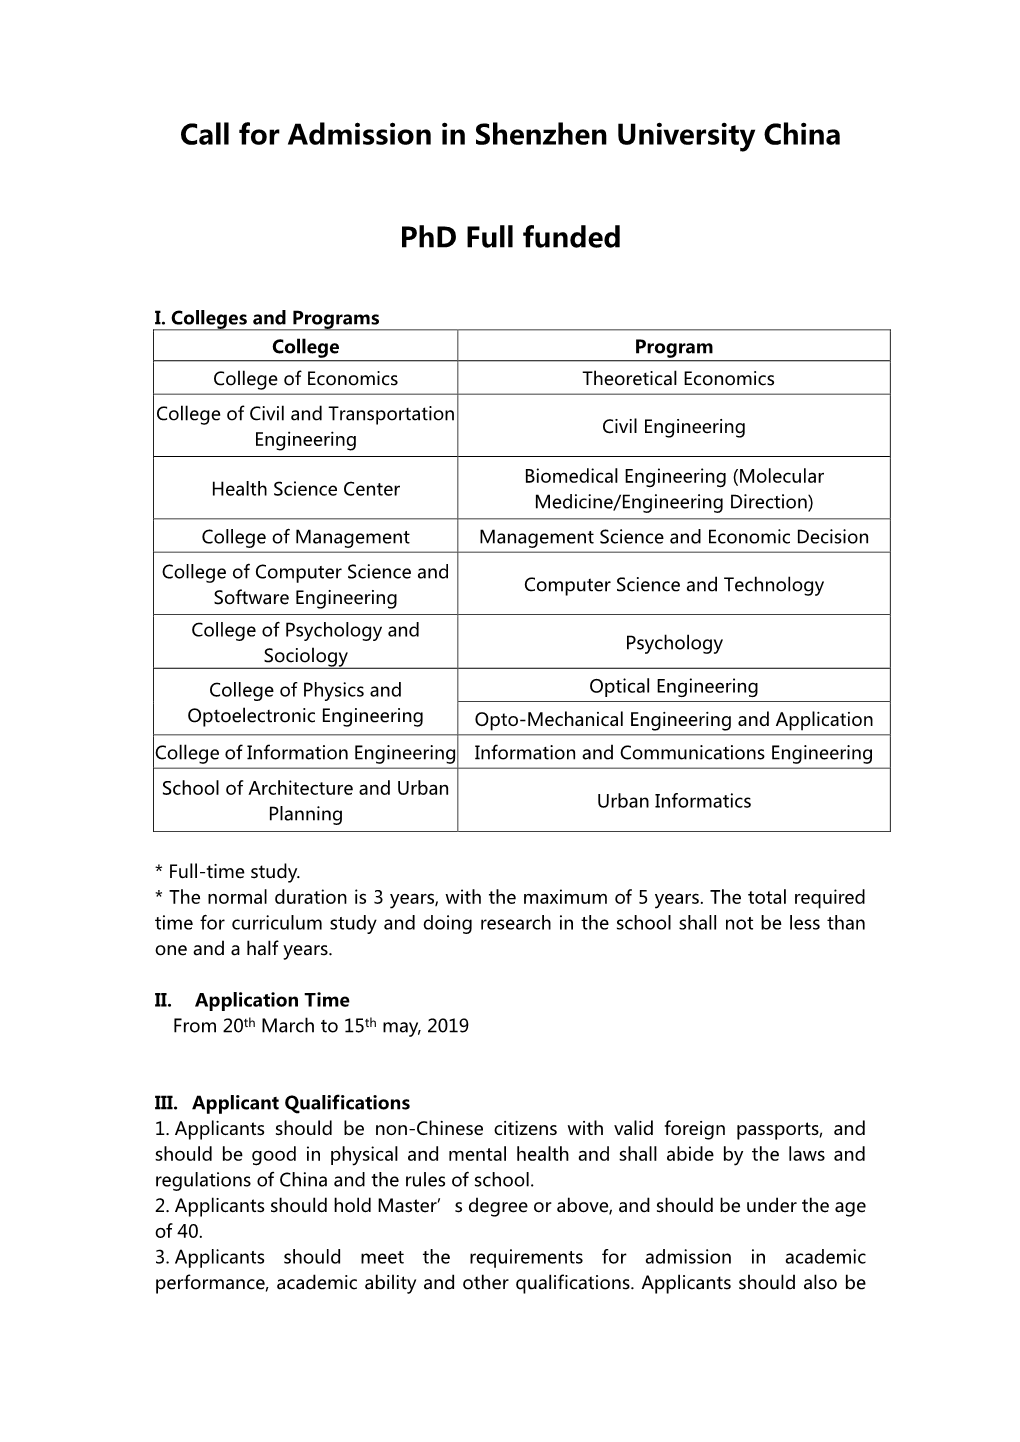 Call for Admission in Shenzhen University China Phd Full Funded